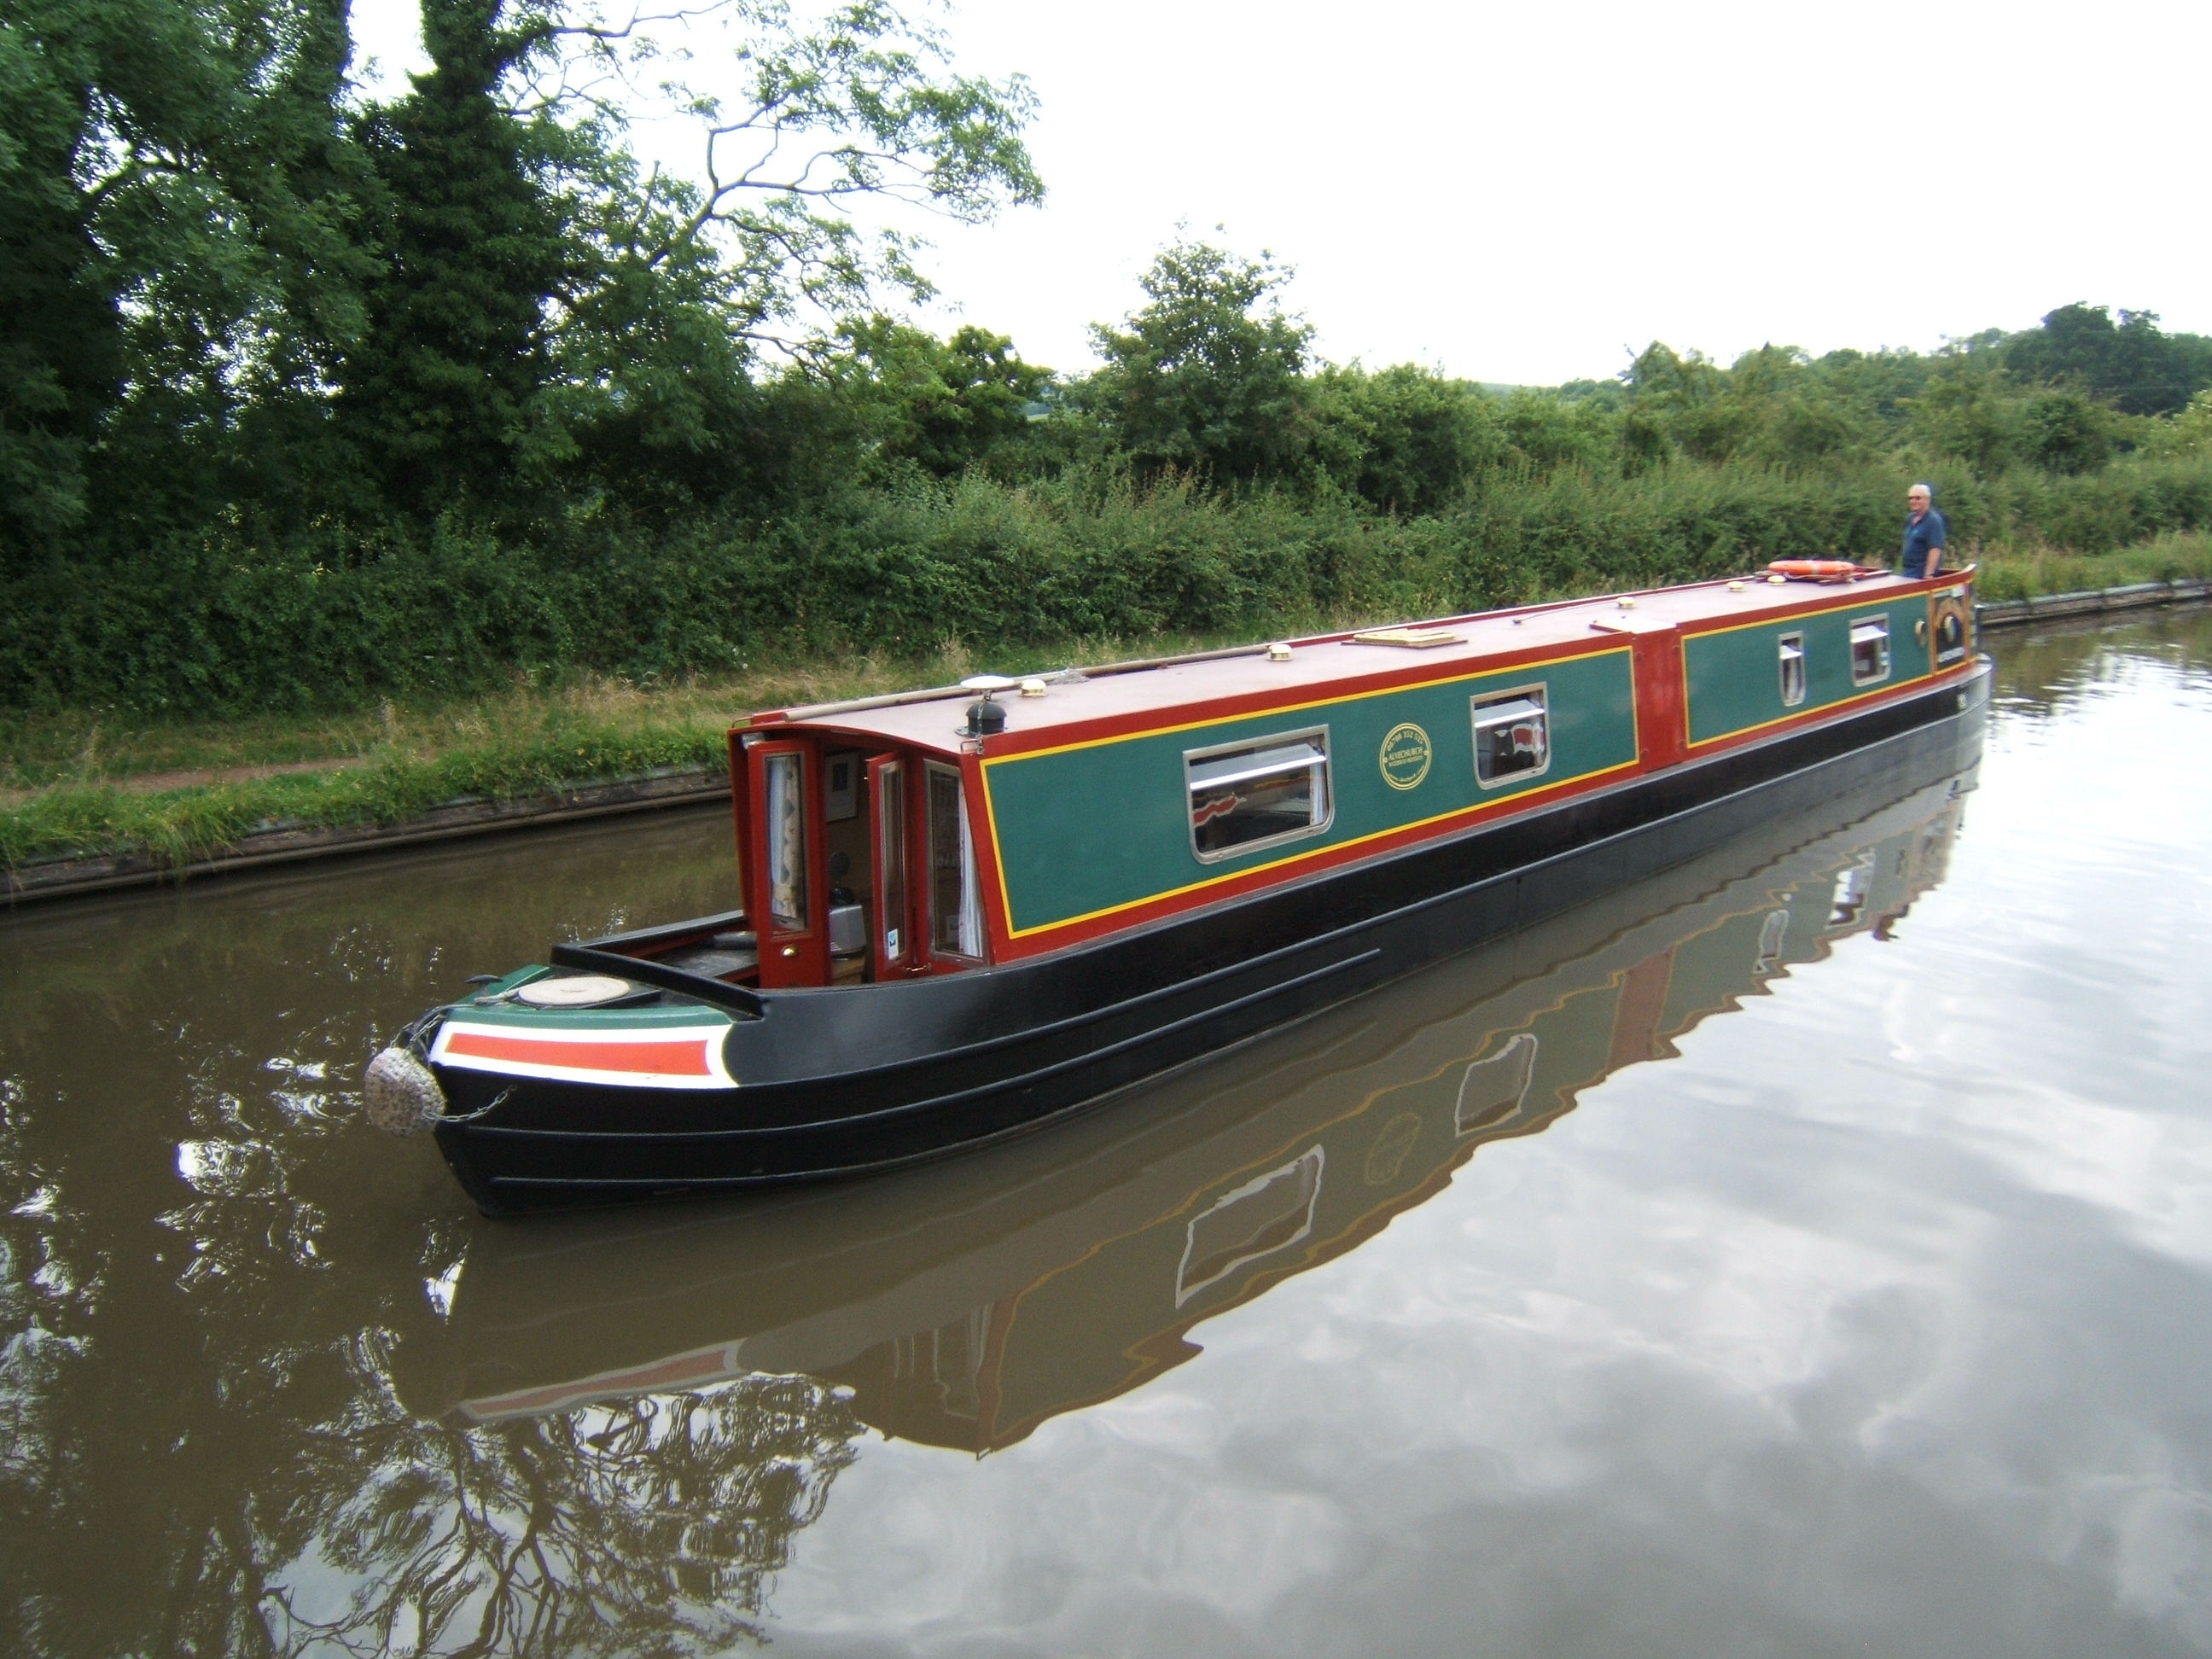 The Heron class canal boat